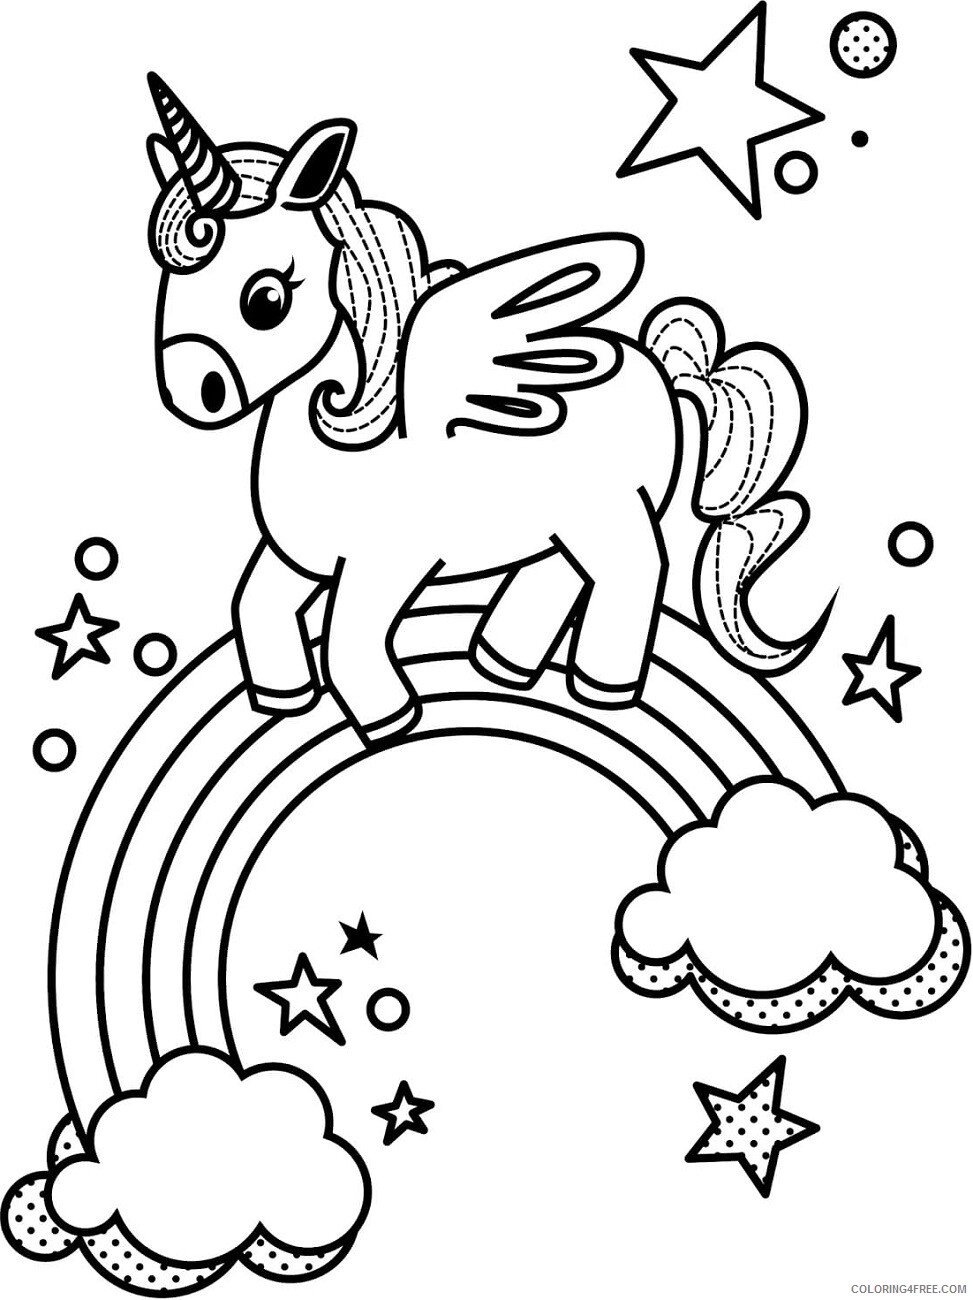 Rainbow Coloring Pages little_unicorn_n_rainbow a4 Printable 2021 5012 Coloring4free